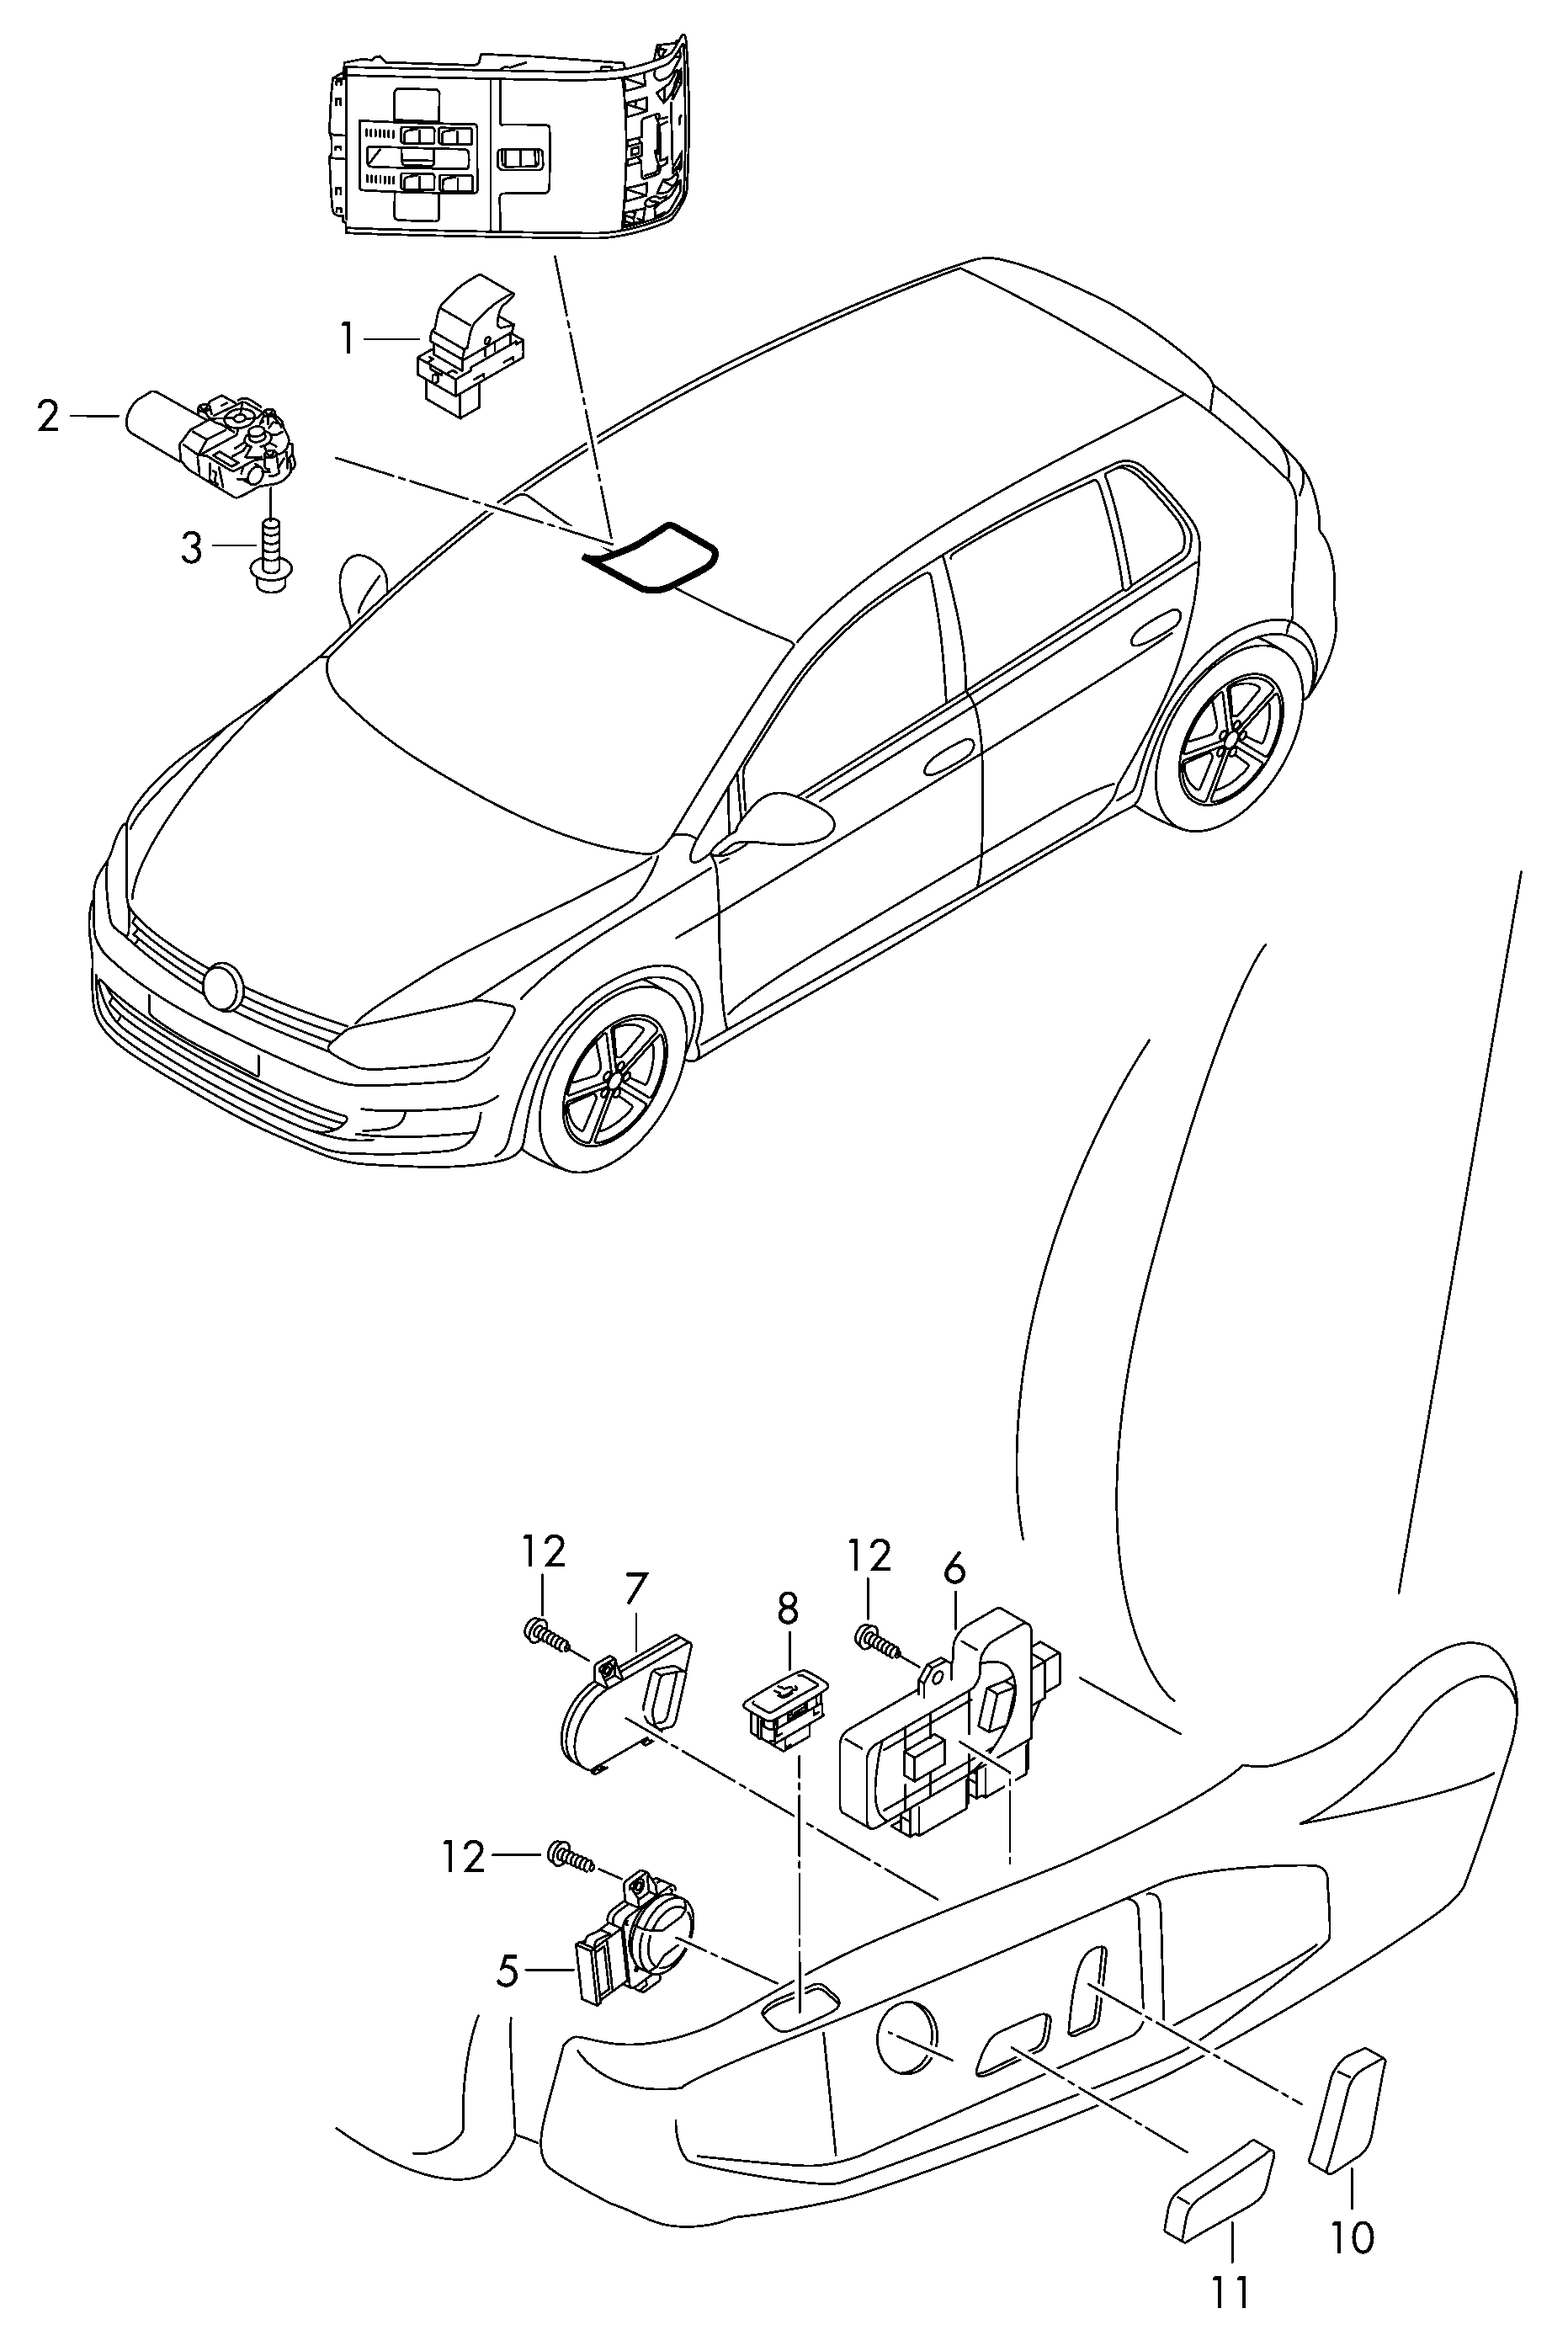 switch for seat adjustment  - Golf/Variant/4Motion - golf